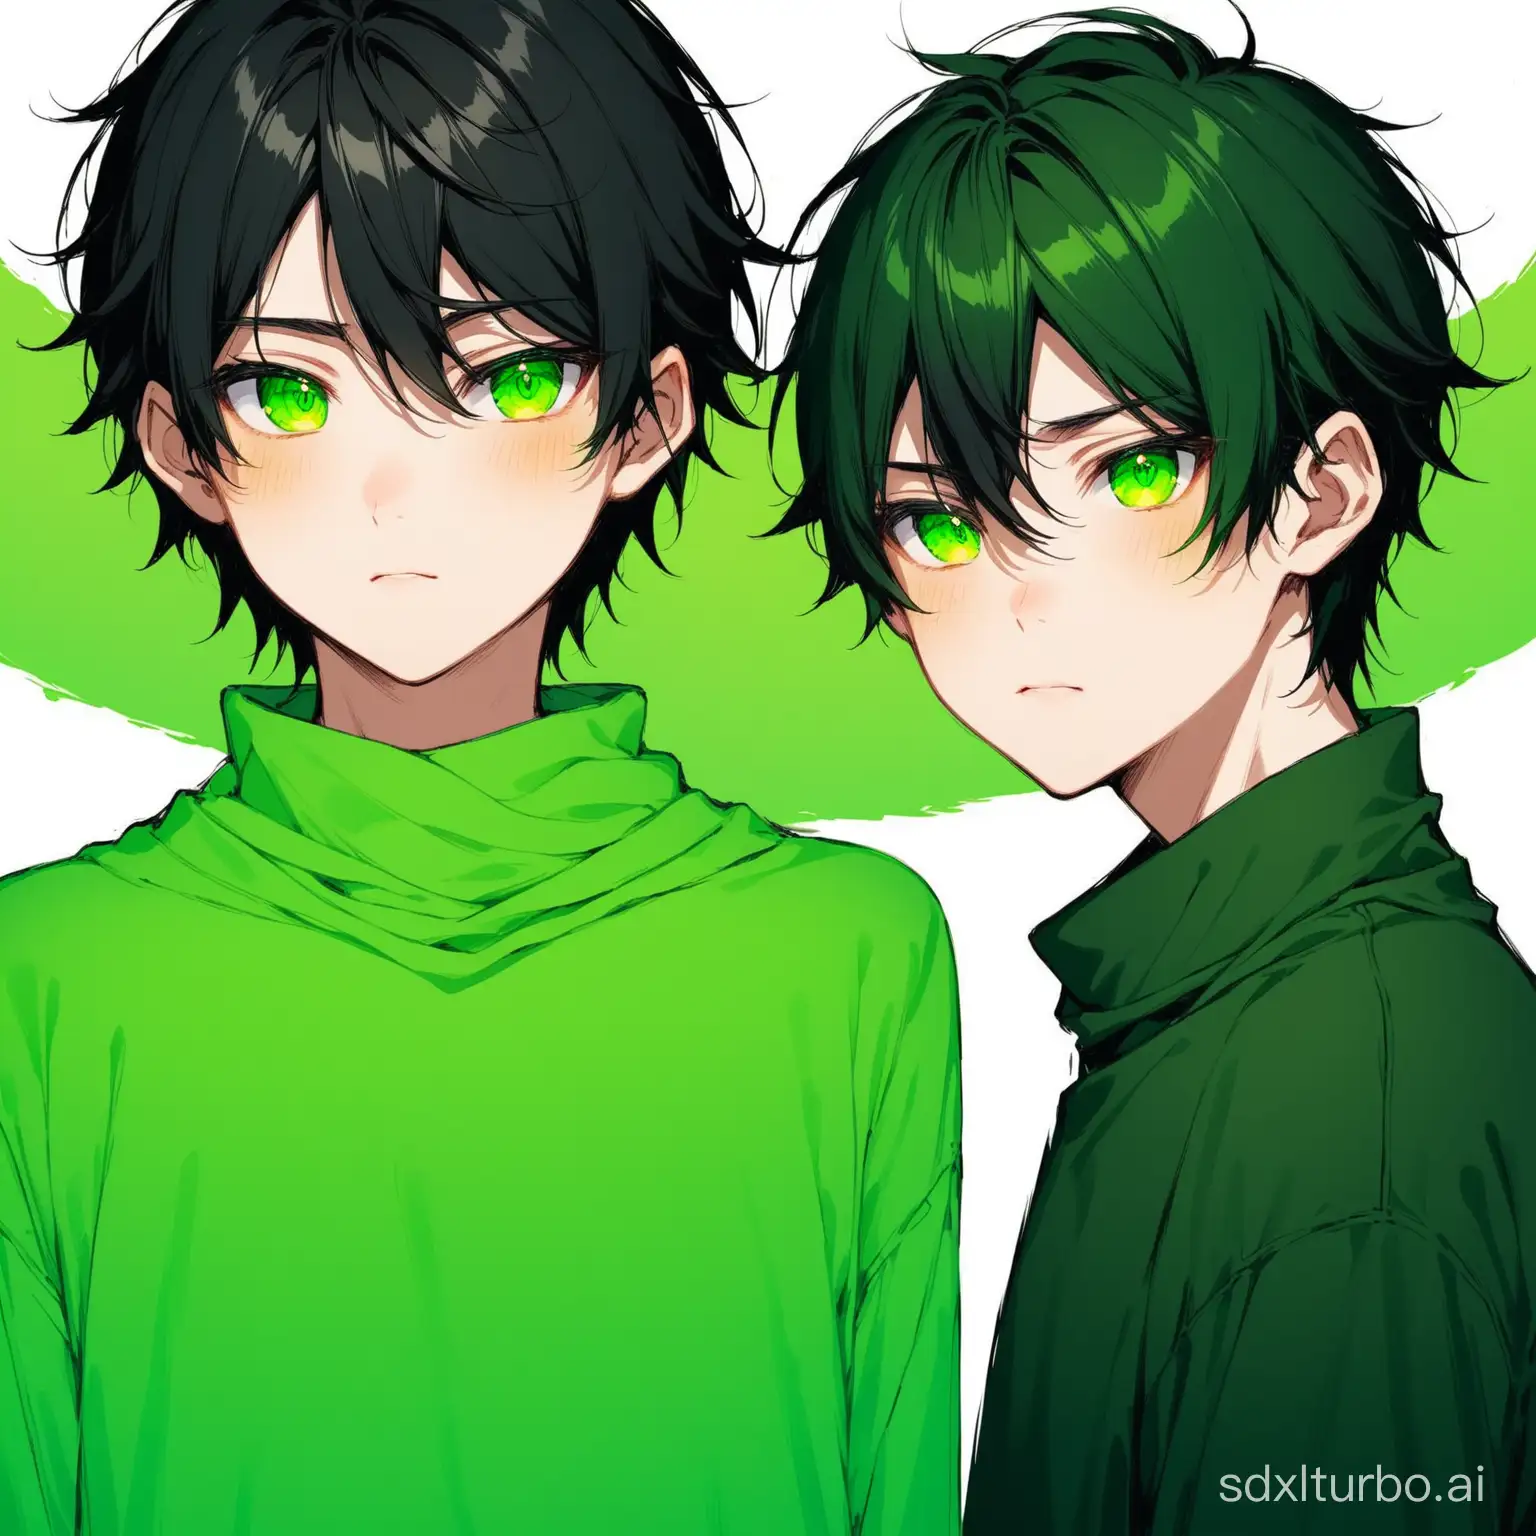 Black hair gradually transitions into a highly saturated green color, boy, green eyes, skin tinged with an unhealthy white.